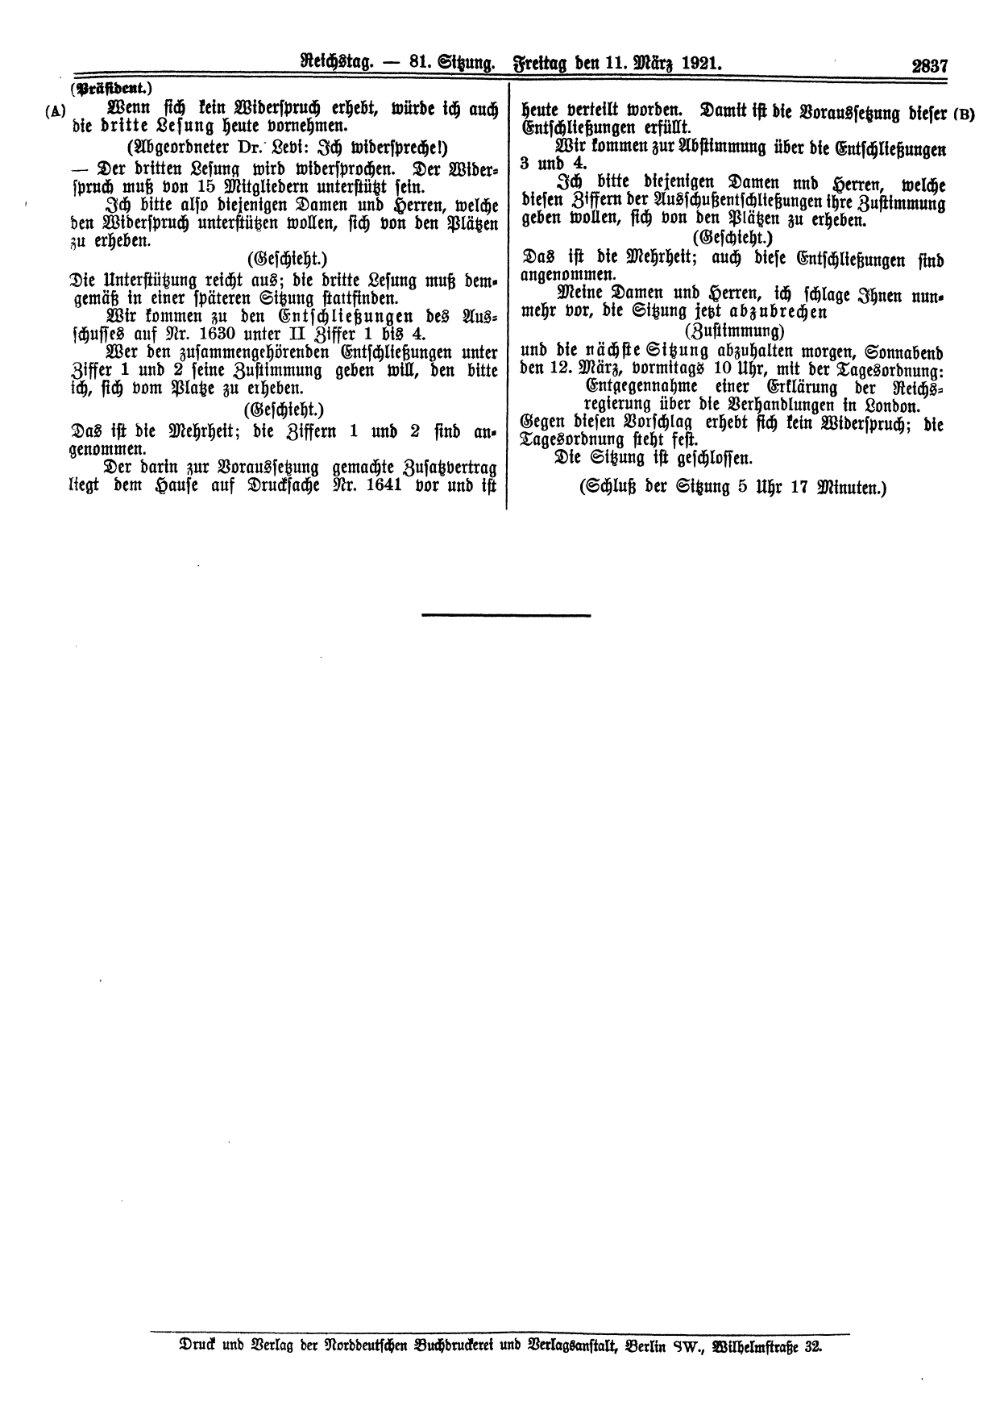 Scan of page 2837